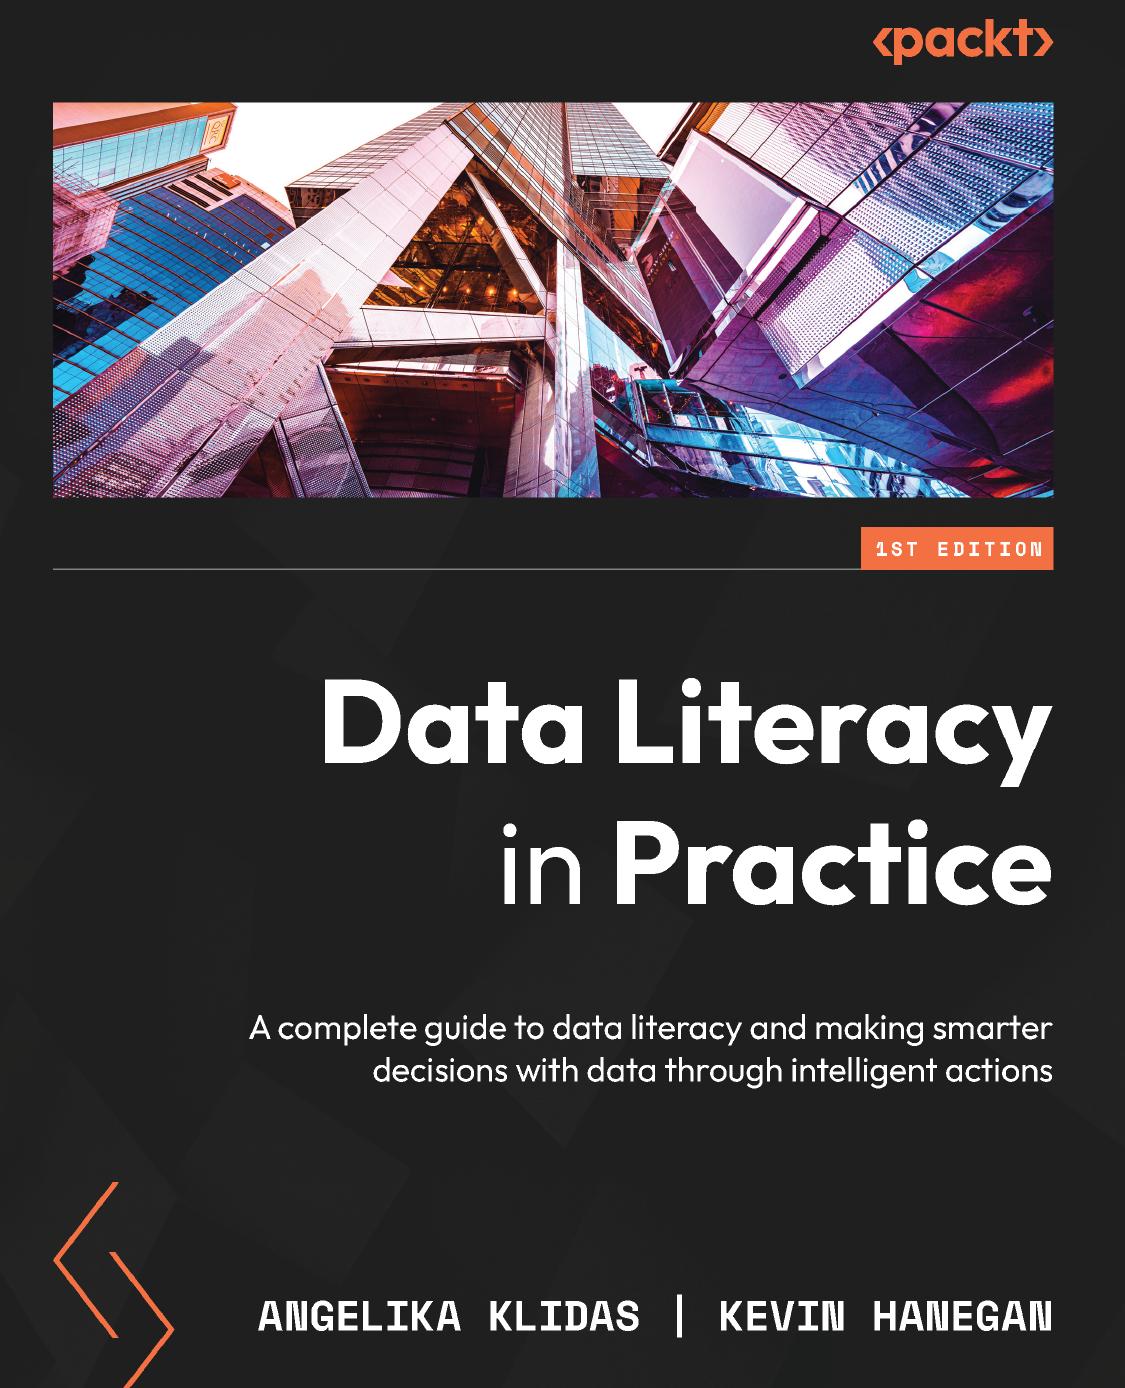 Data Literacy in Practice - A complete guide to data literacy and making smarter decisions with data through intelligent actions (2022) by Packt